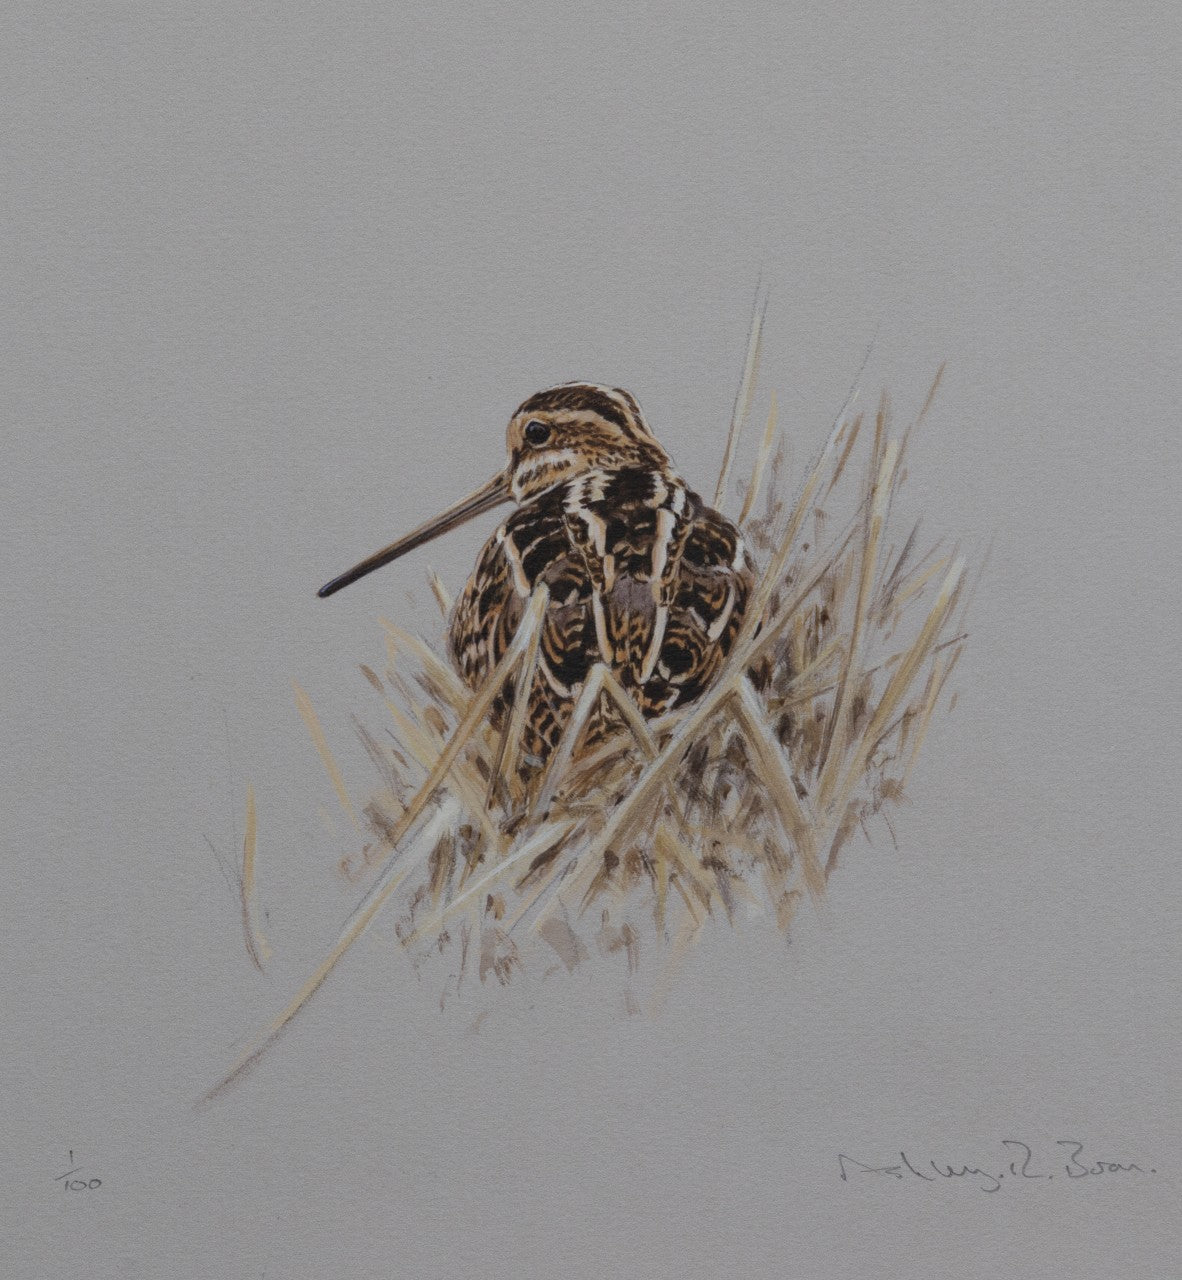 004. 'Snipe in Reeds' Limited Edition Print (100 only) by Ashley Boon - 9.5" x 8.25"